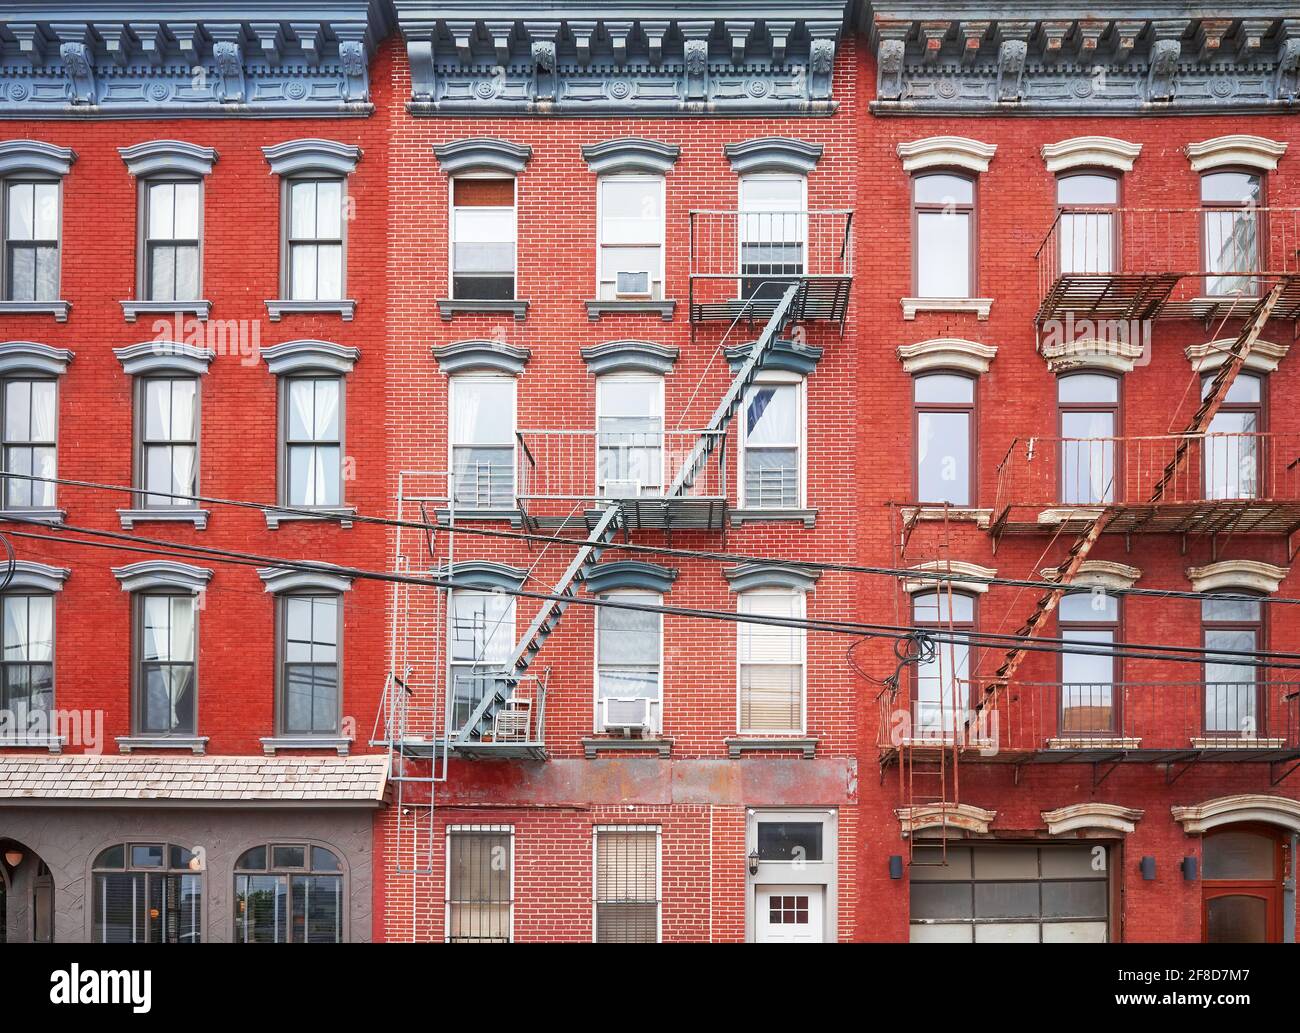 Old red brick buildings with blue iron fire escapes, New York City, USA. Stock Photo